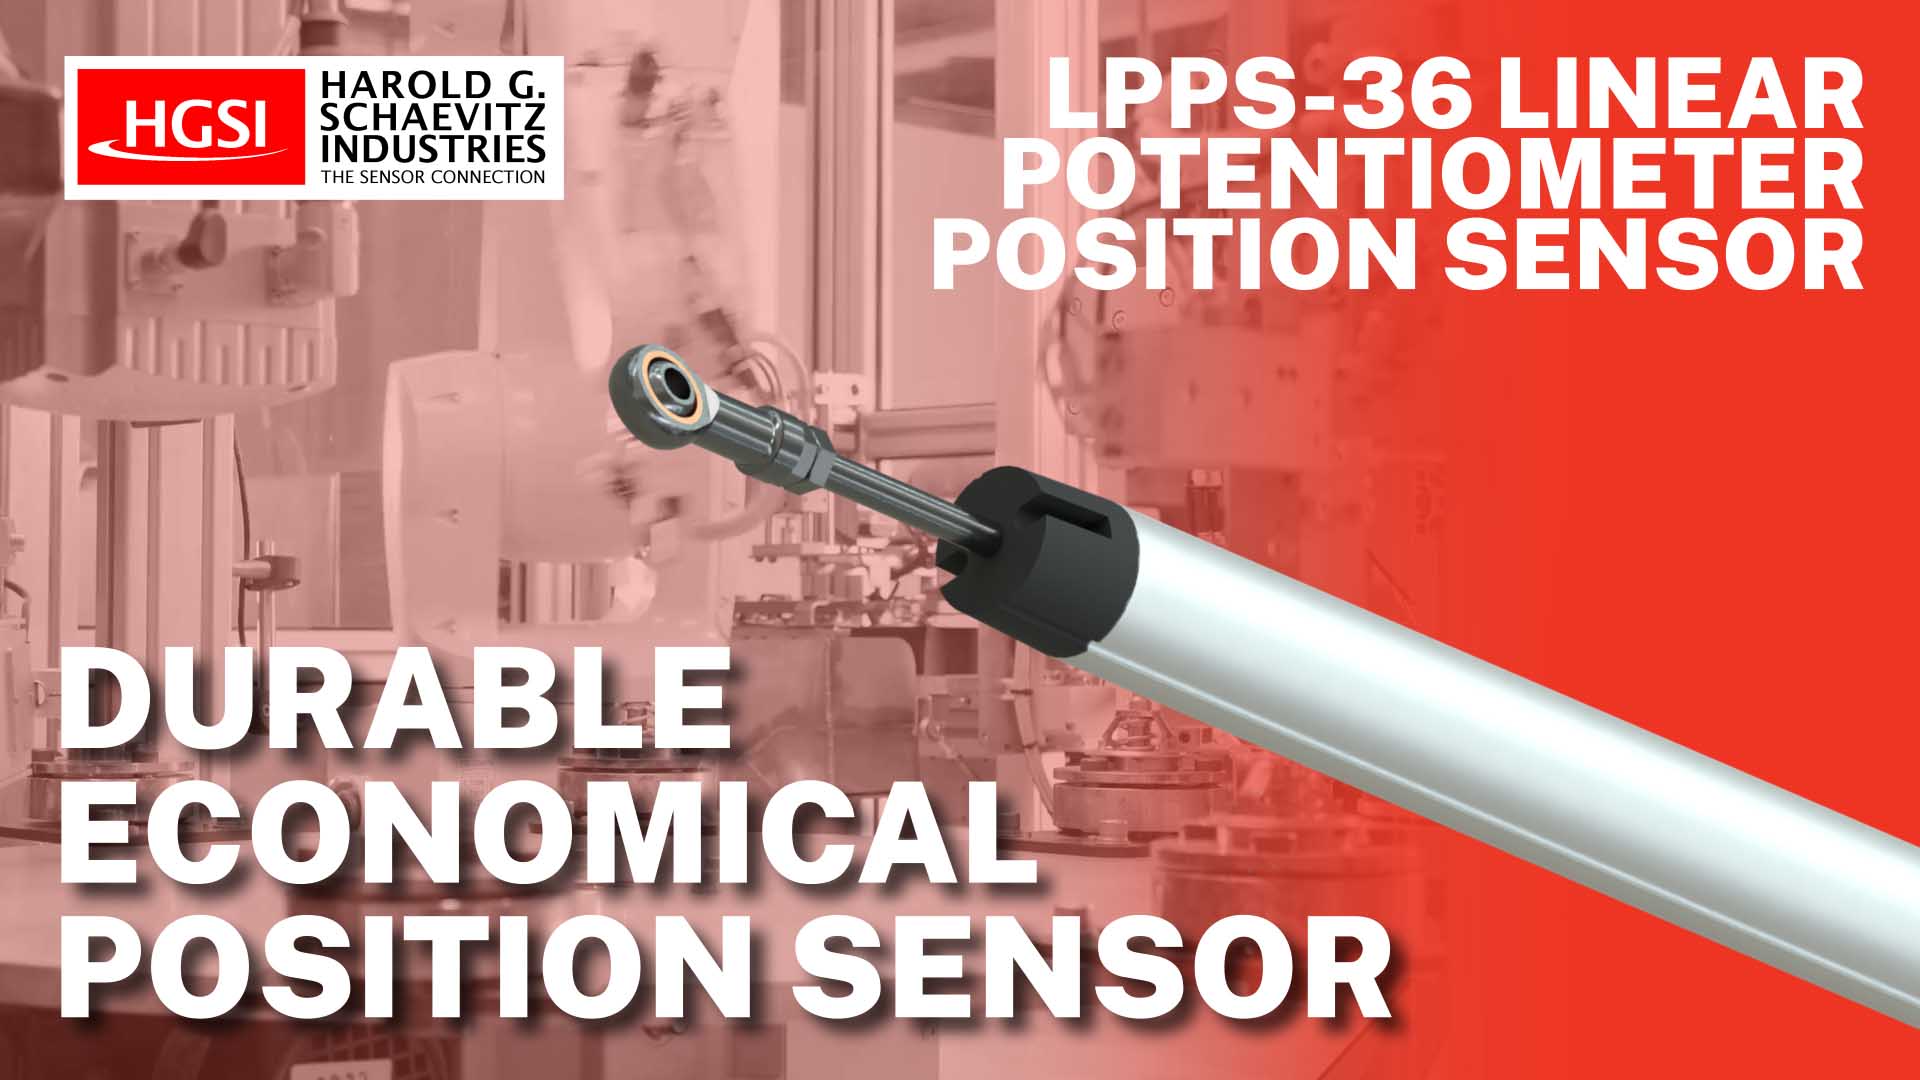 Overview of LPPS-36 Series Linear Potentiometer Position Sensor